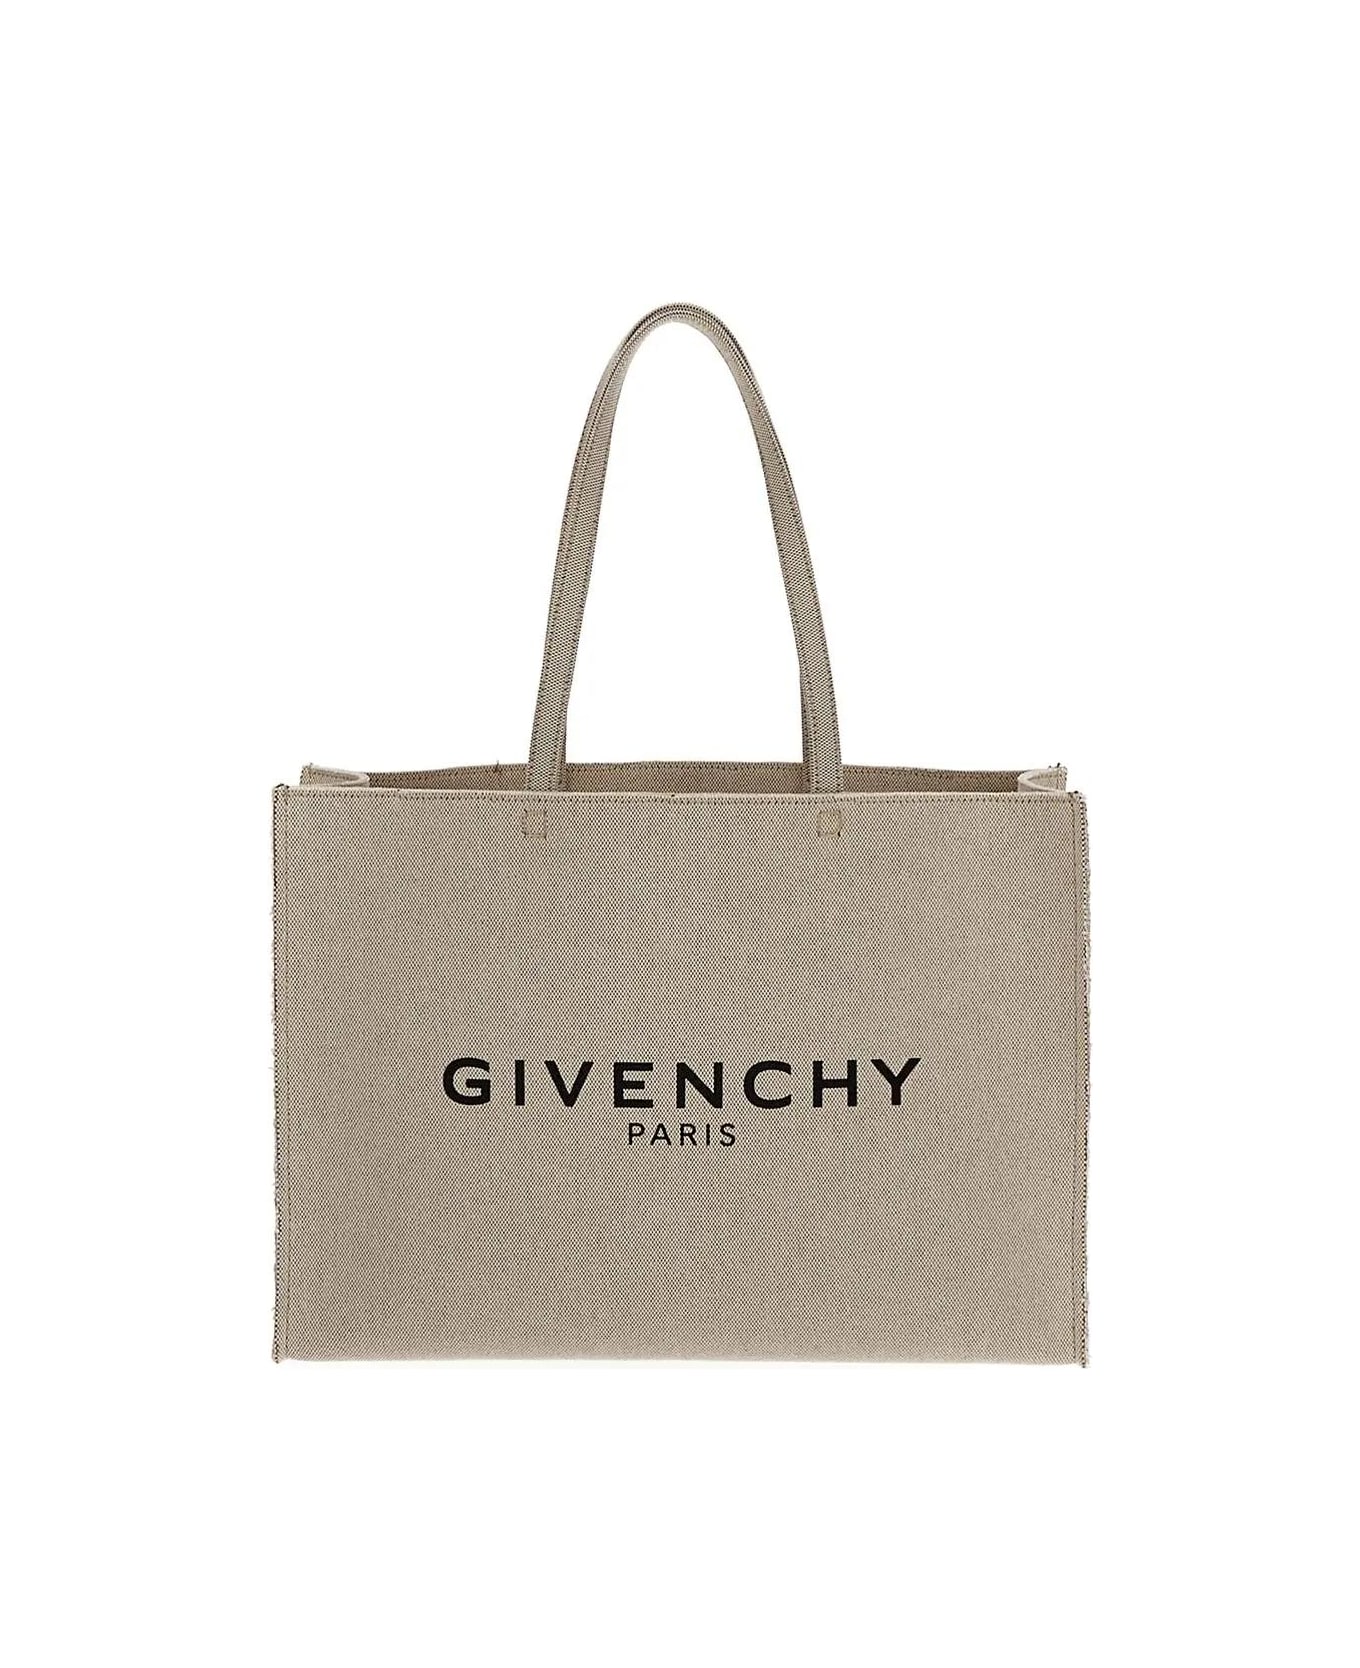 Givenchy Large G Tote Shopping Bag - Beige トートバッグ